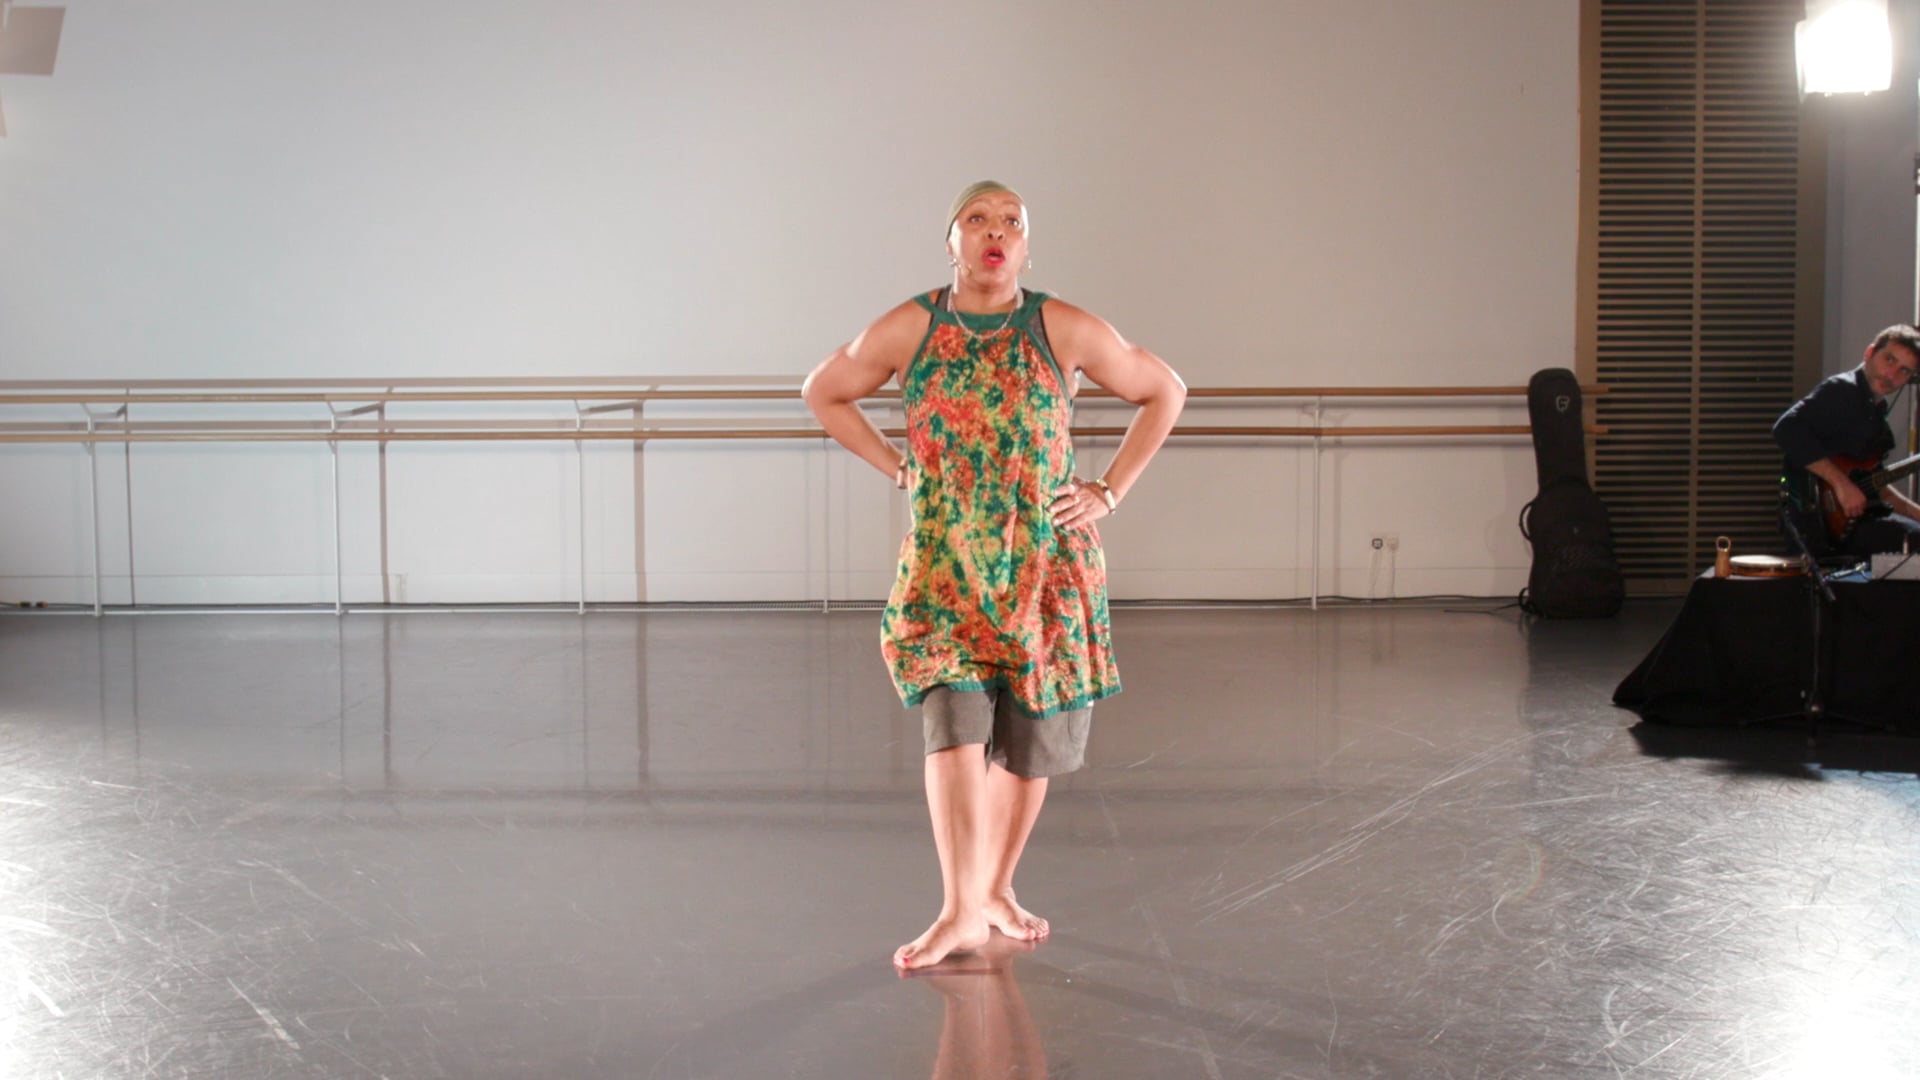 a man standing in a dance studio with his hands on his hips.